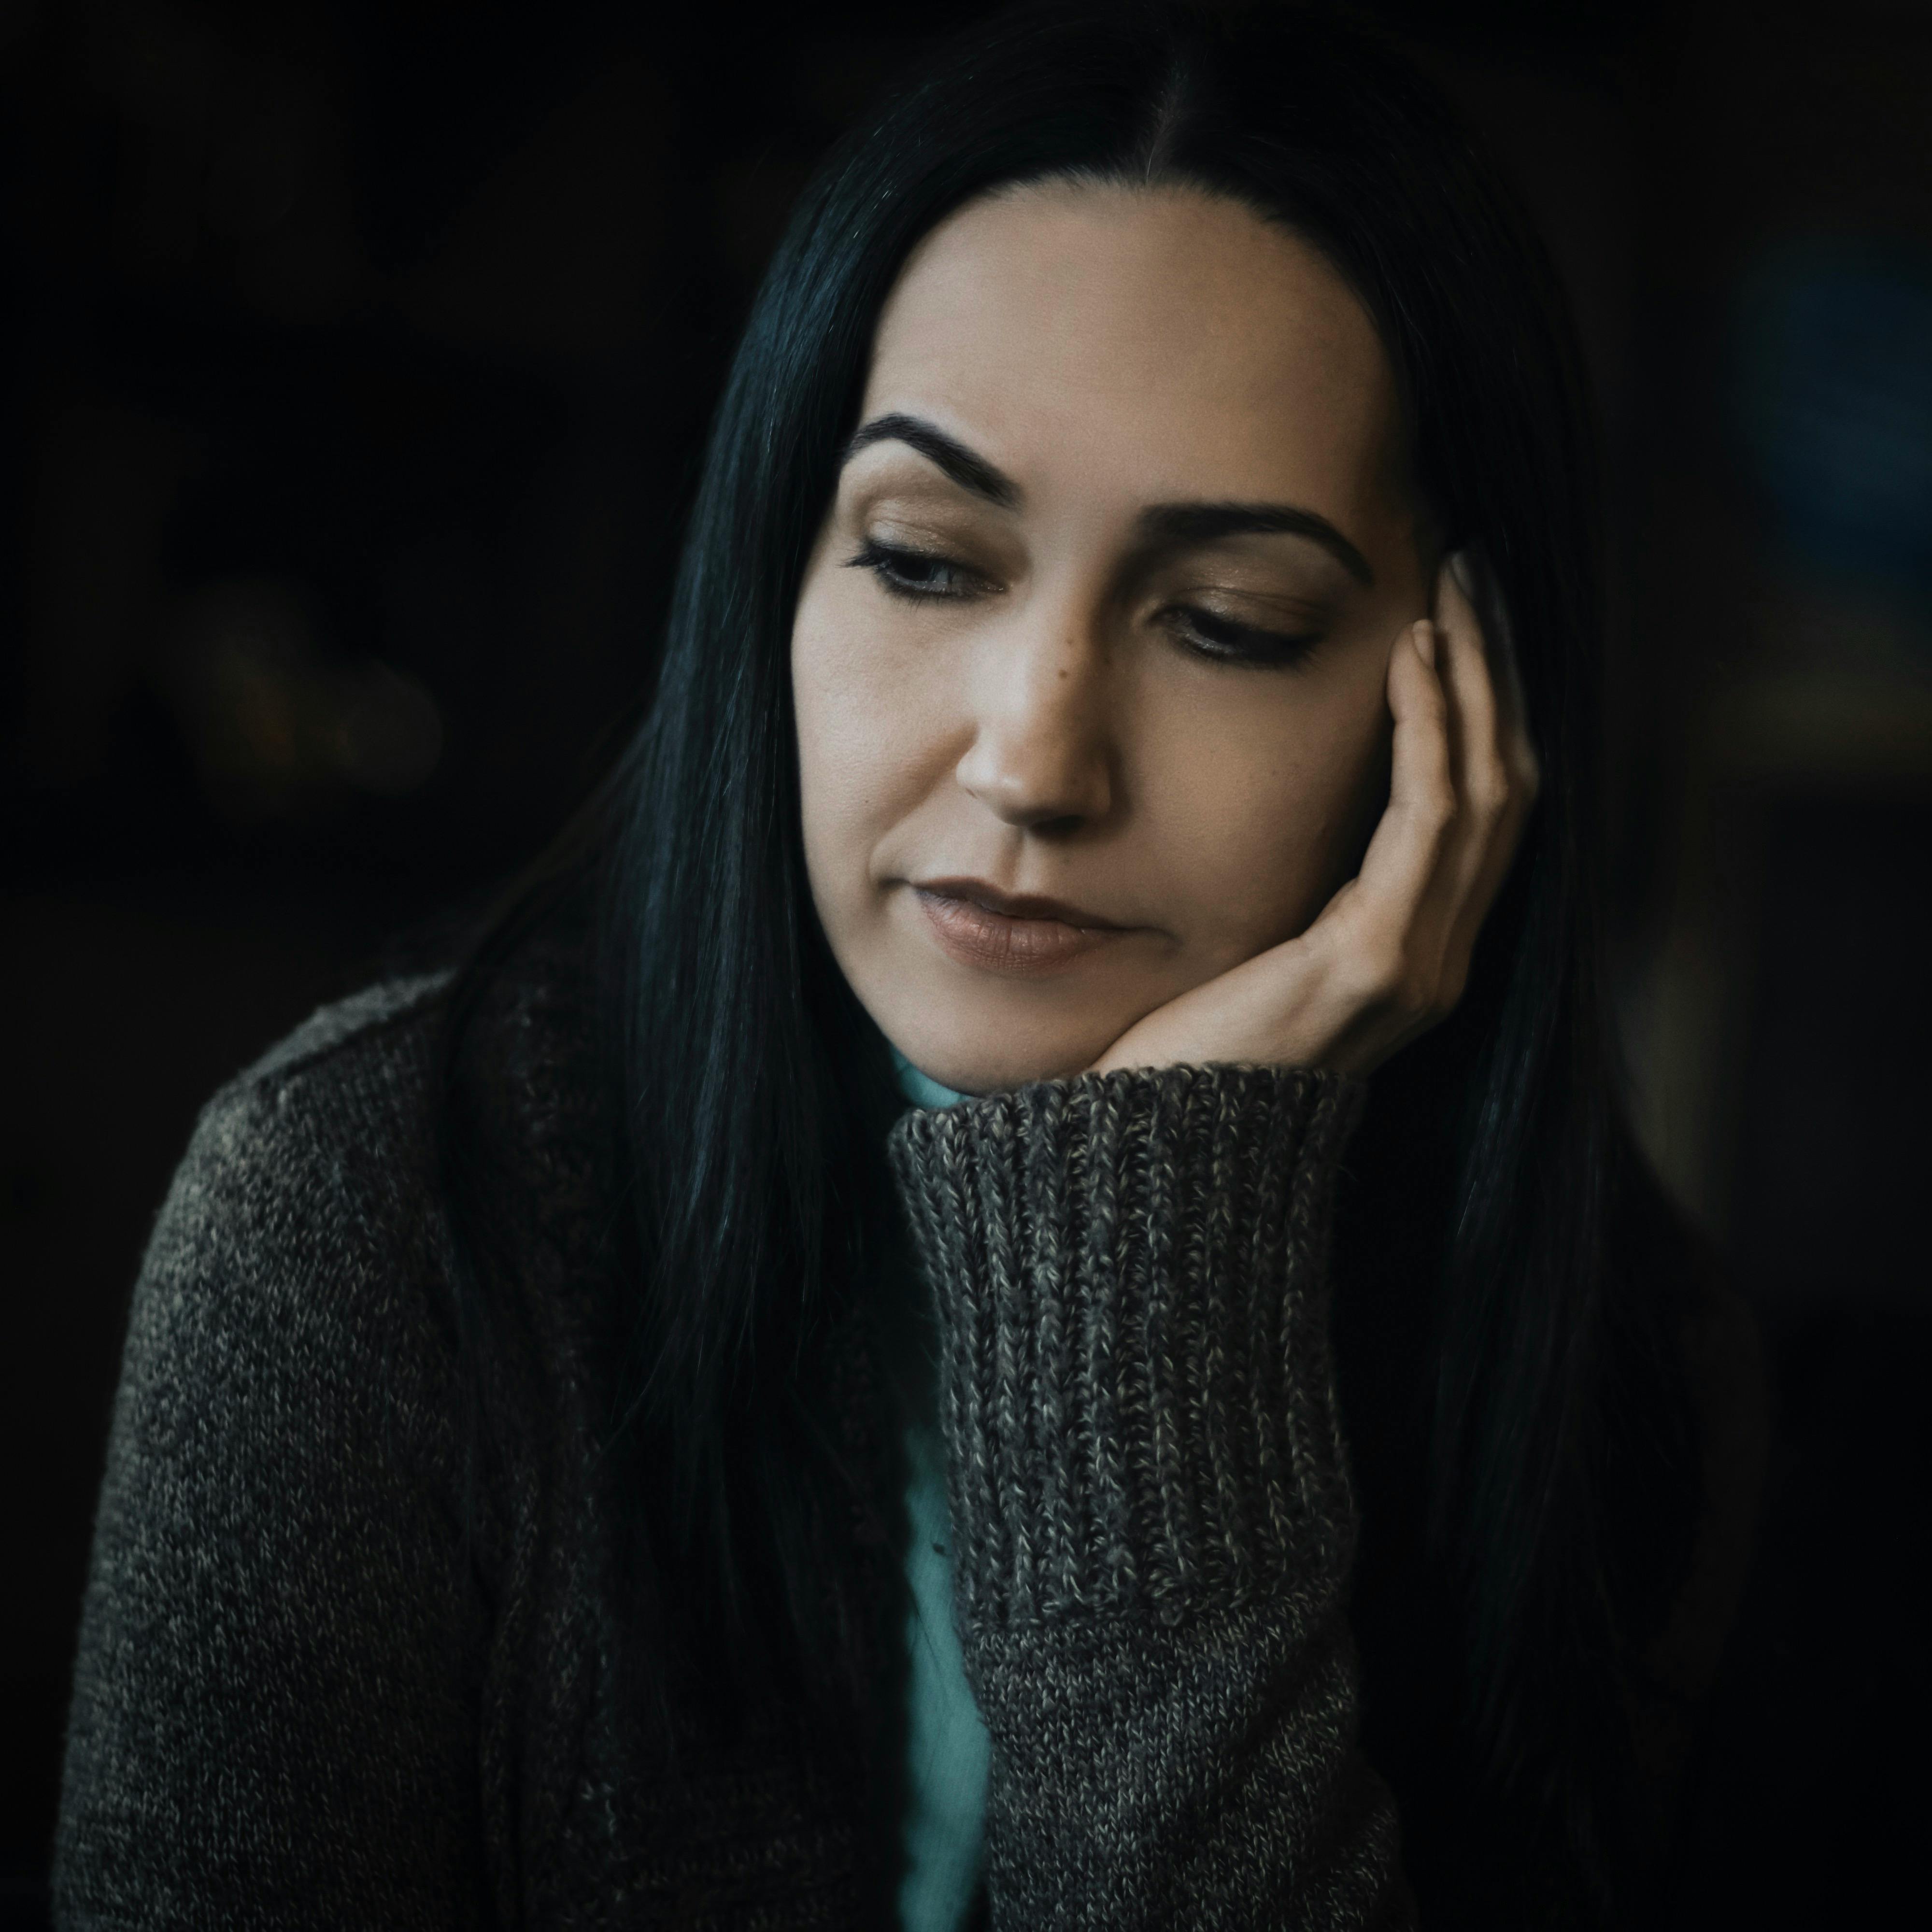 Woman wearing gray sweater and looking sad. | Photo: Pexels